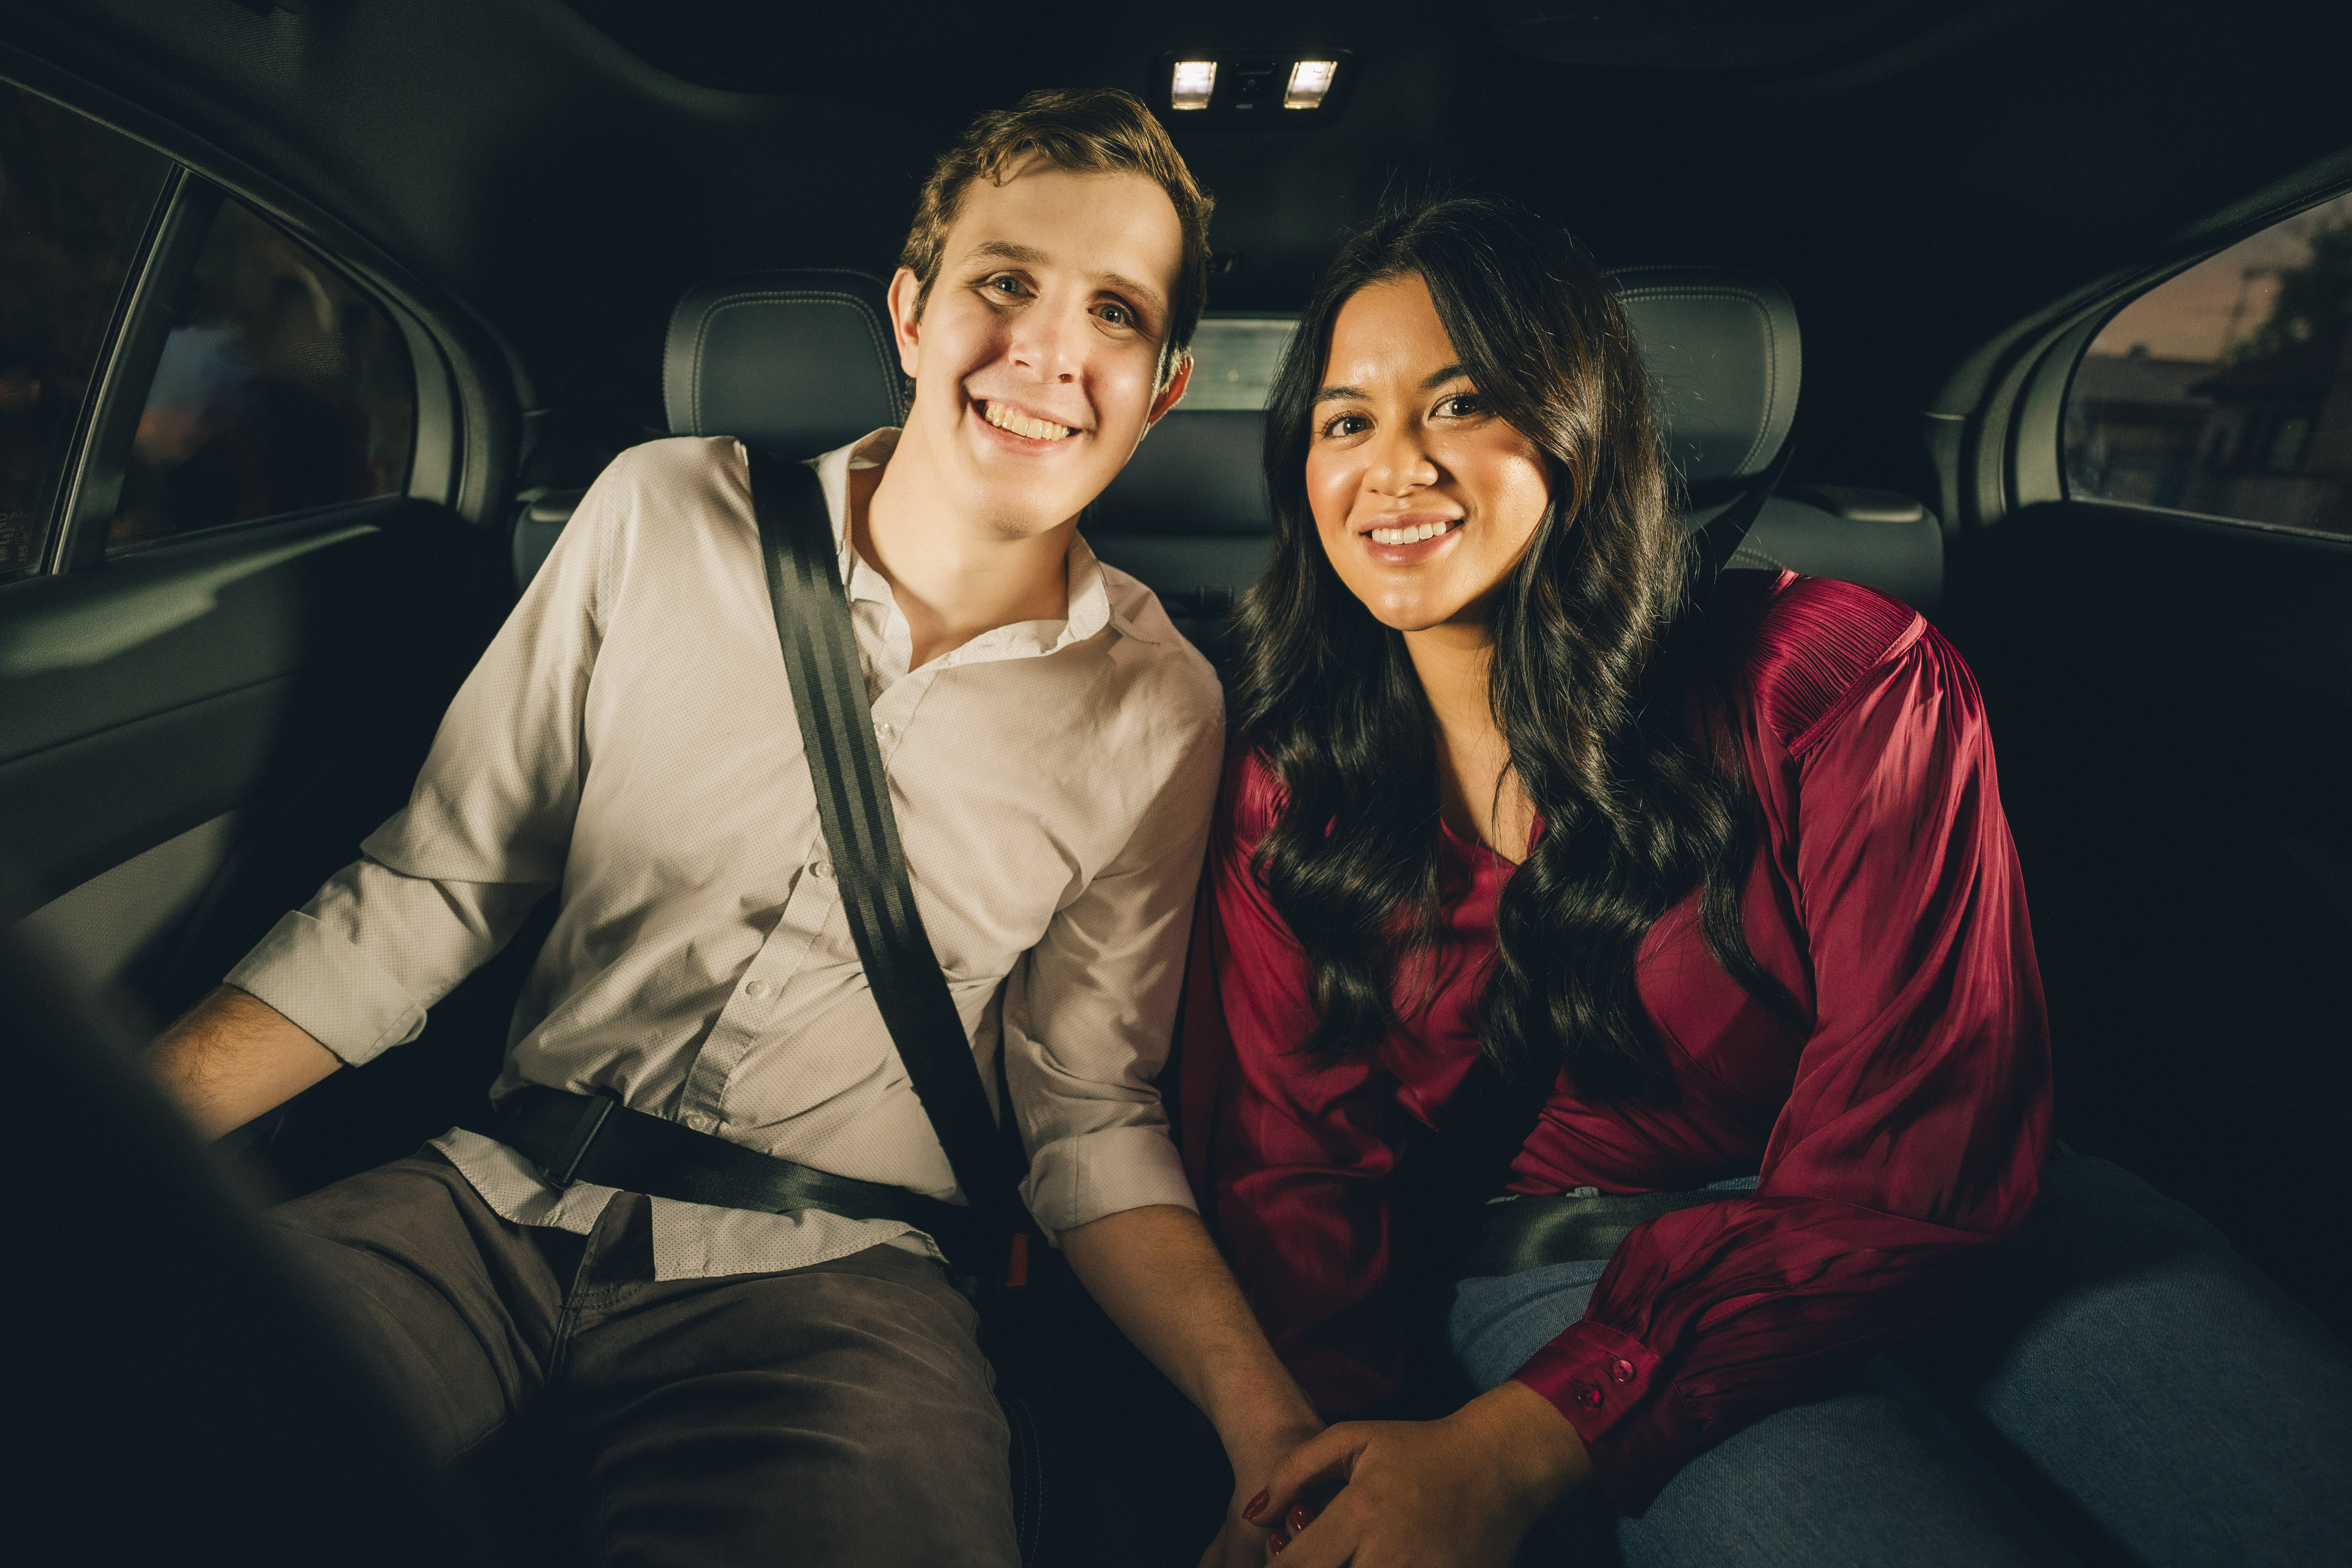 Max and Lilian holding hands and smiling in the backseat of a Waymo One autonomous ride-hailing vehicle